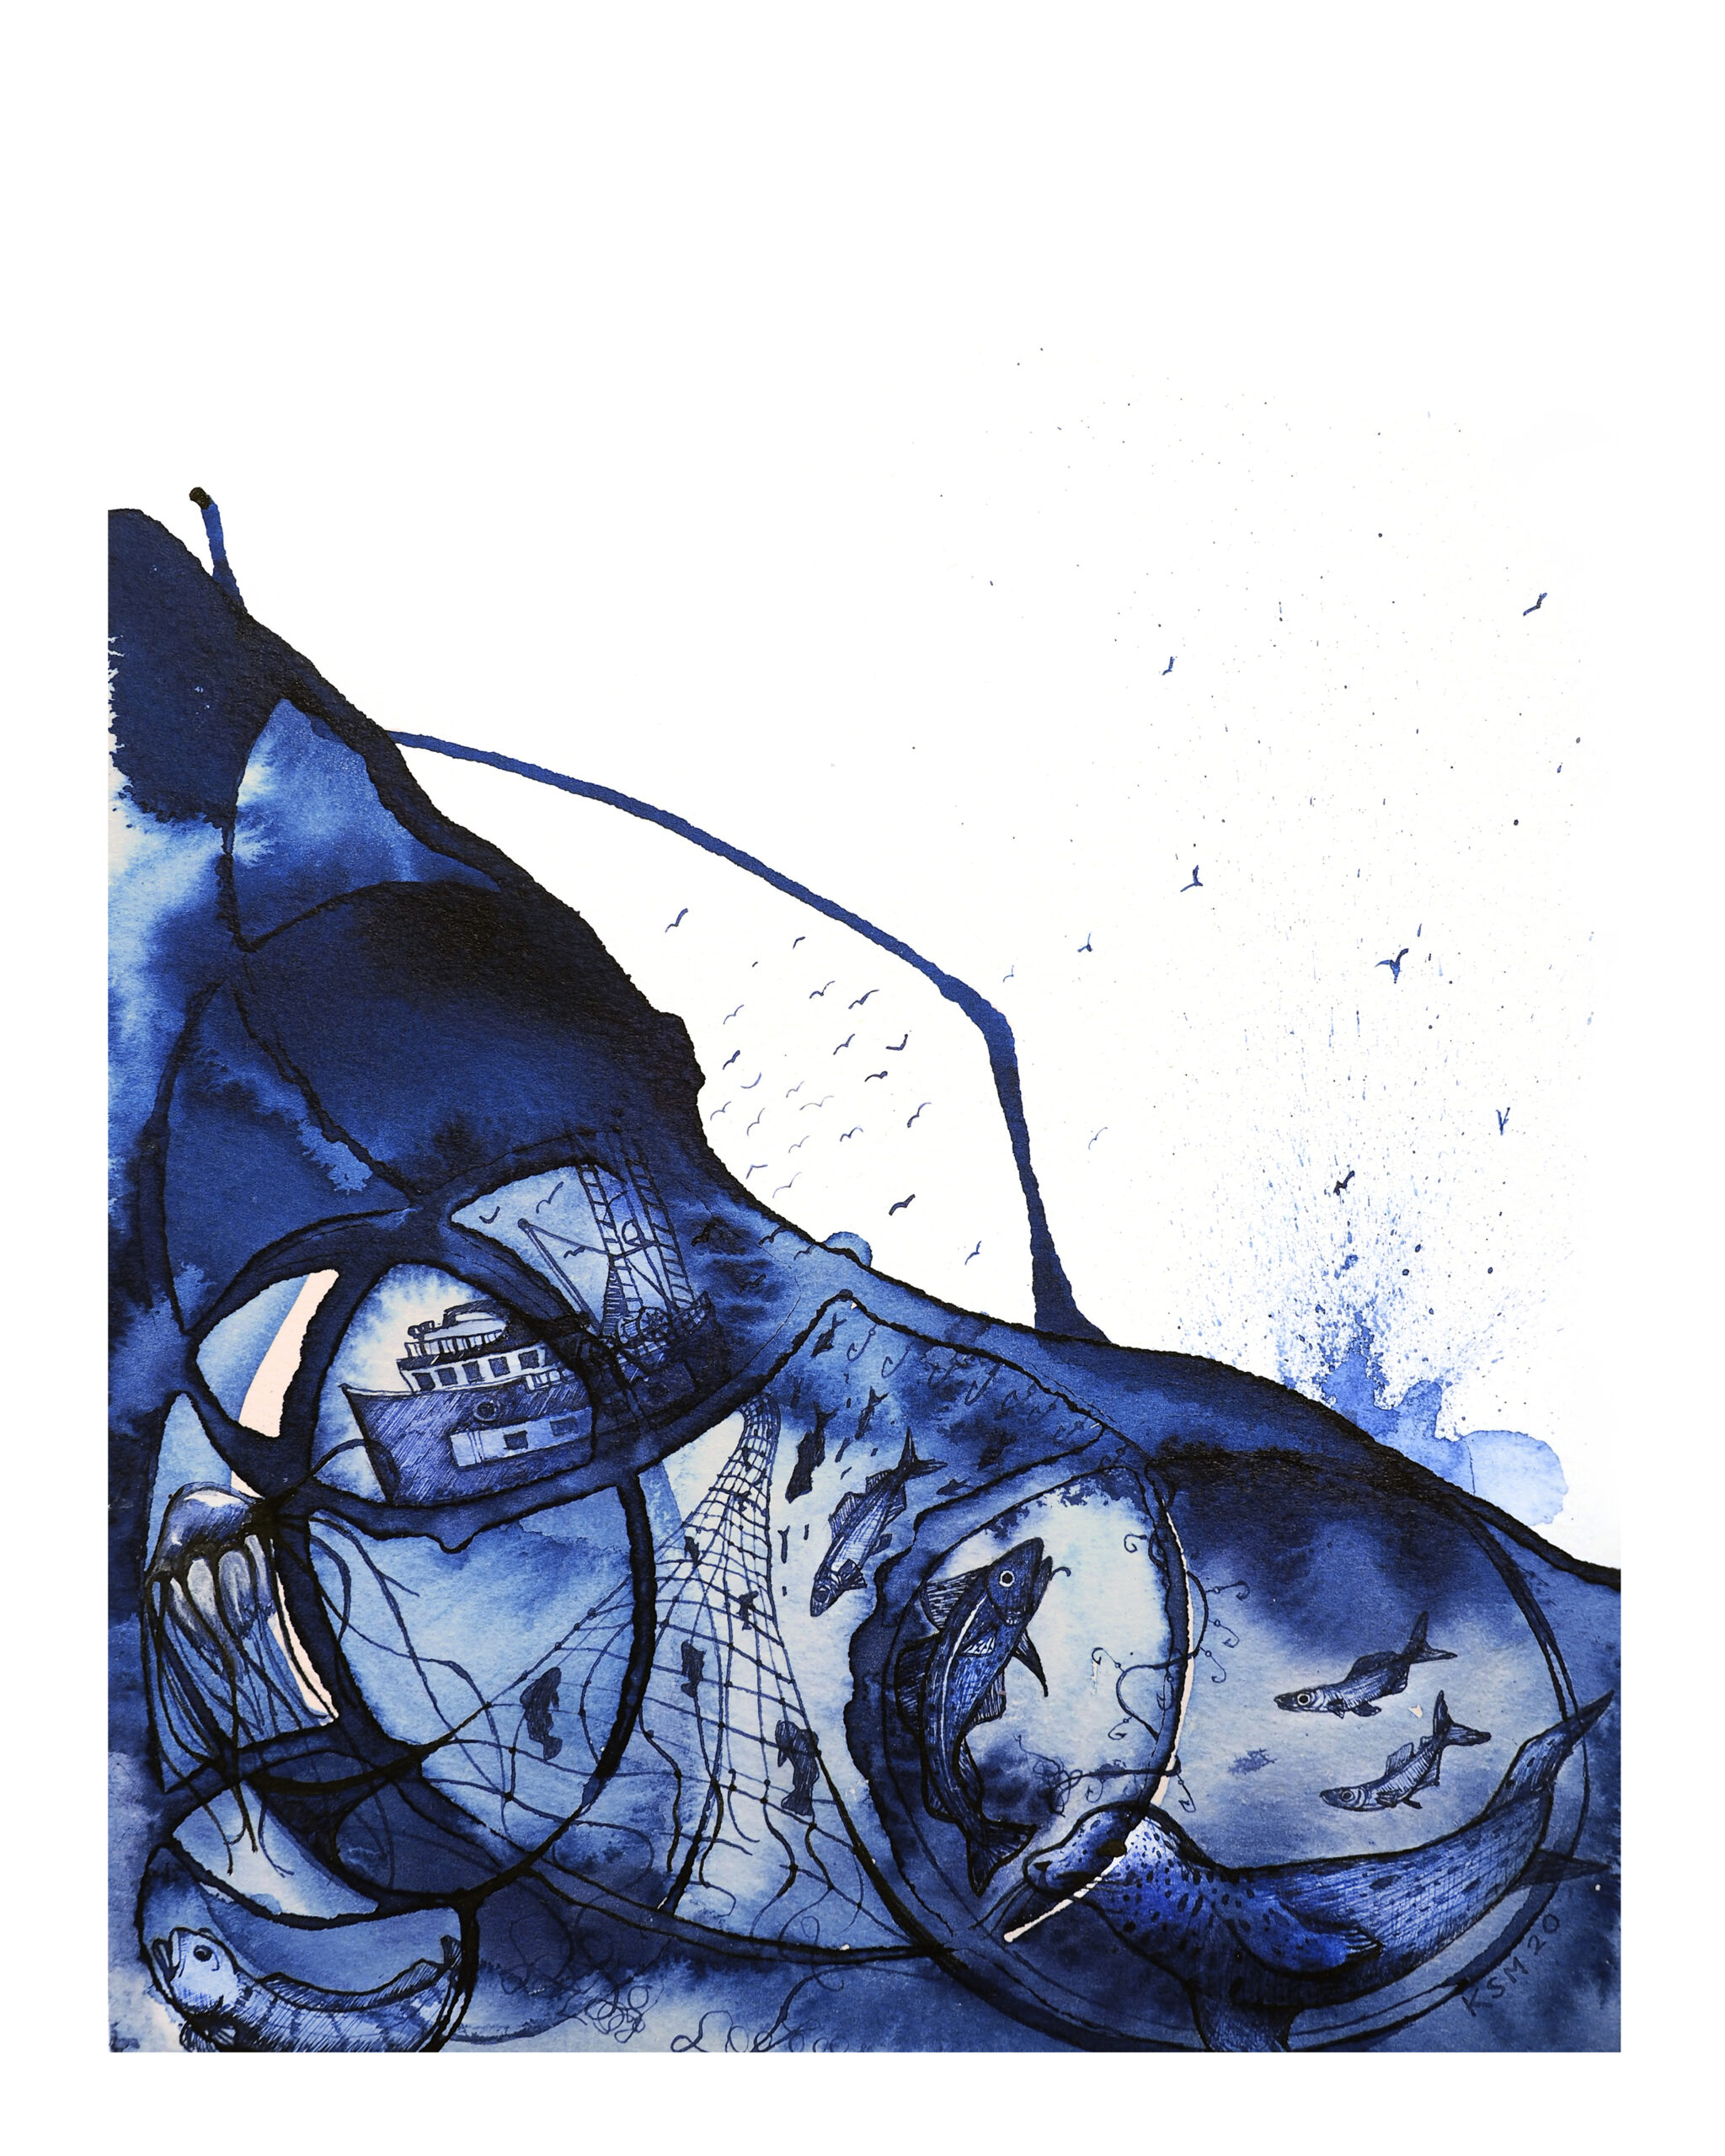 Artwork depicting marine life and activities in a splash of blue